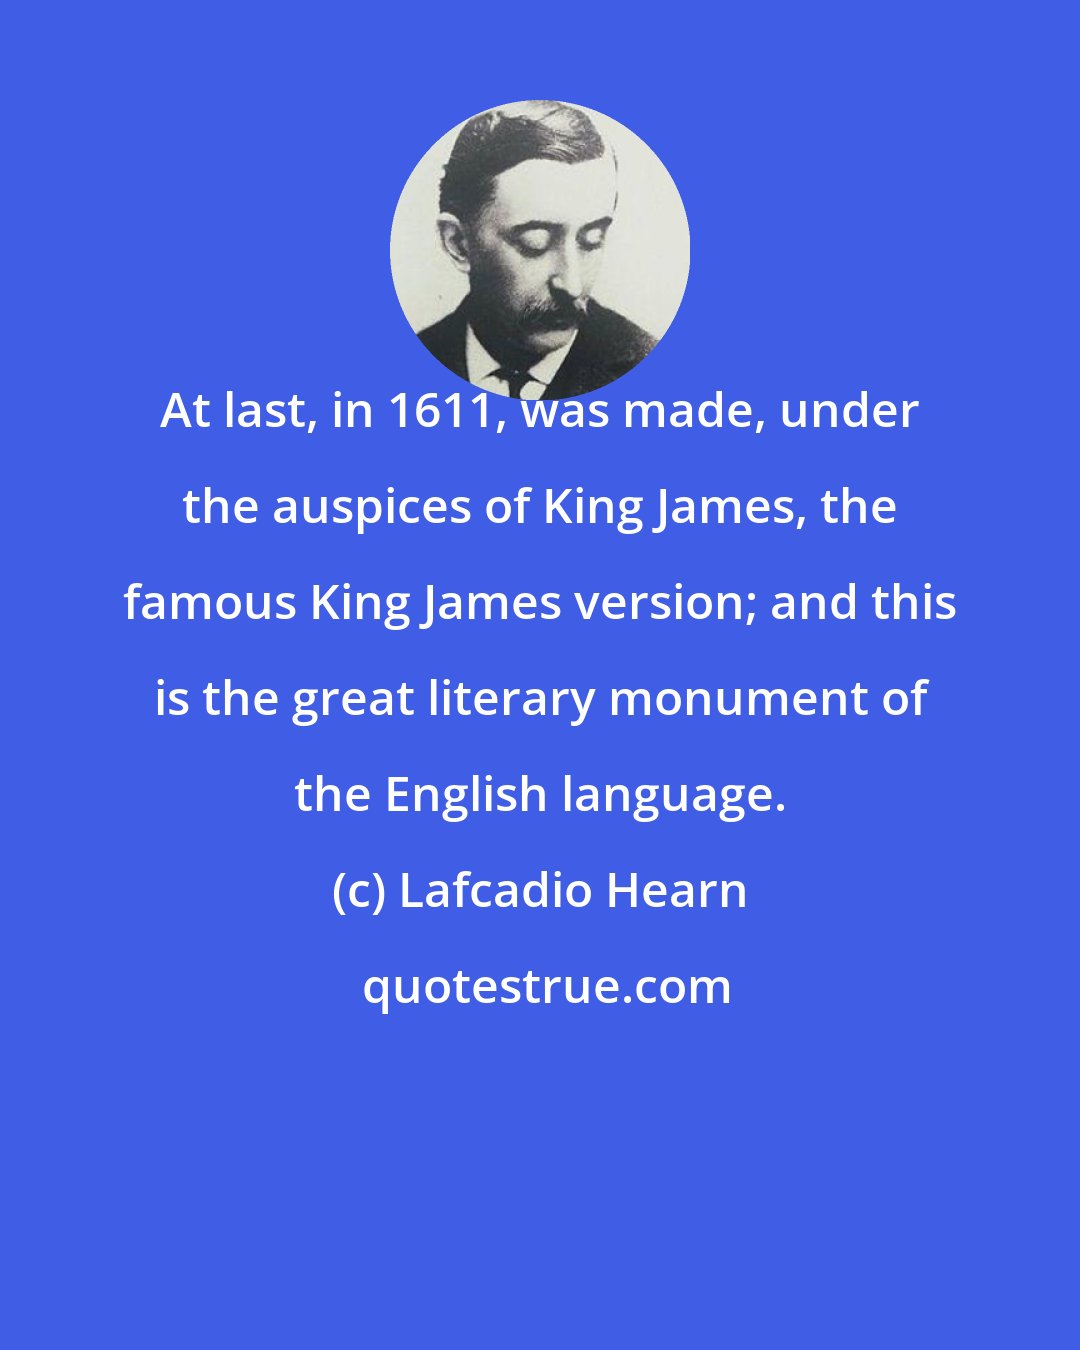 Lafcadio Hearn: At last, in 1611, was made, under the auspices of King James, the famous King James version; and this is the great literary monument of the English language.